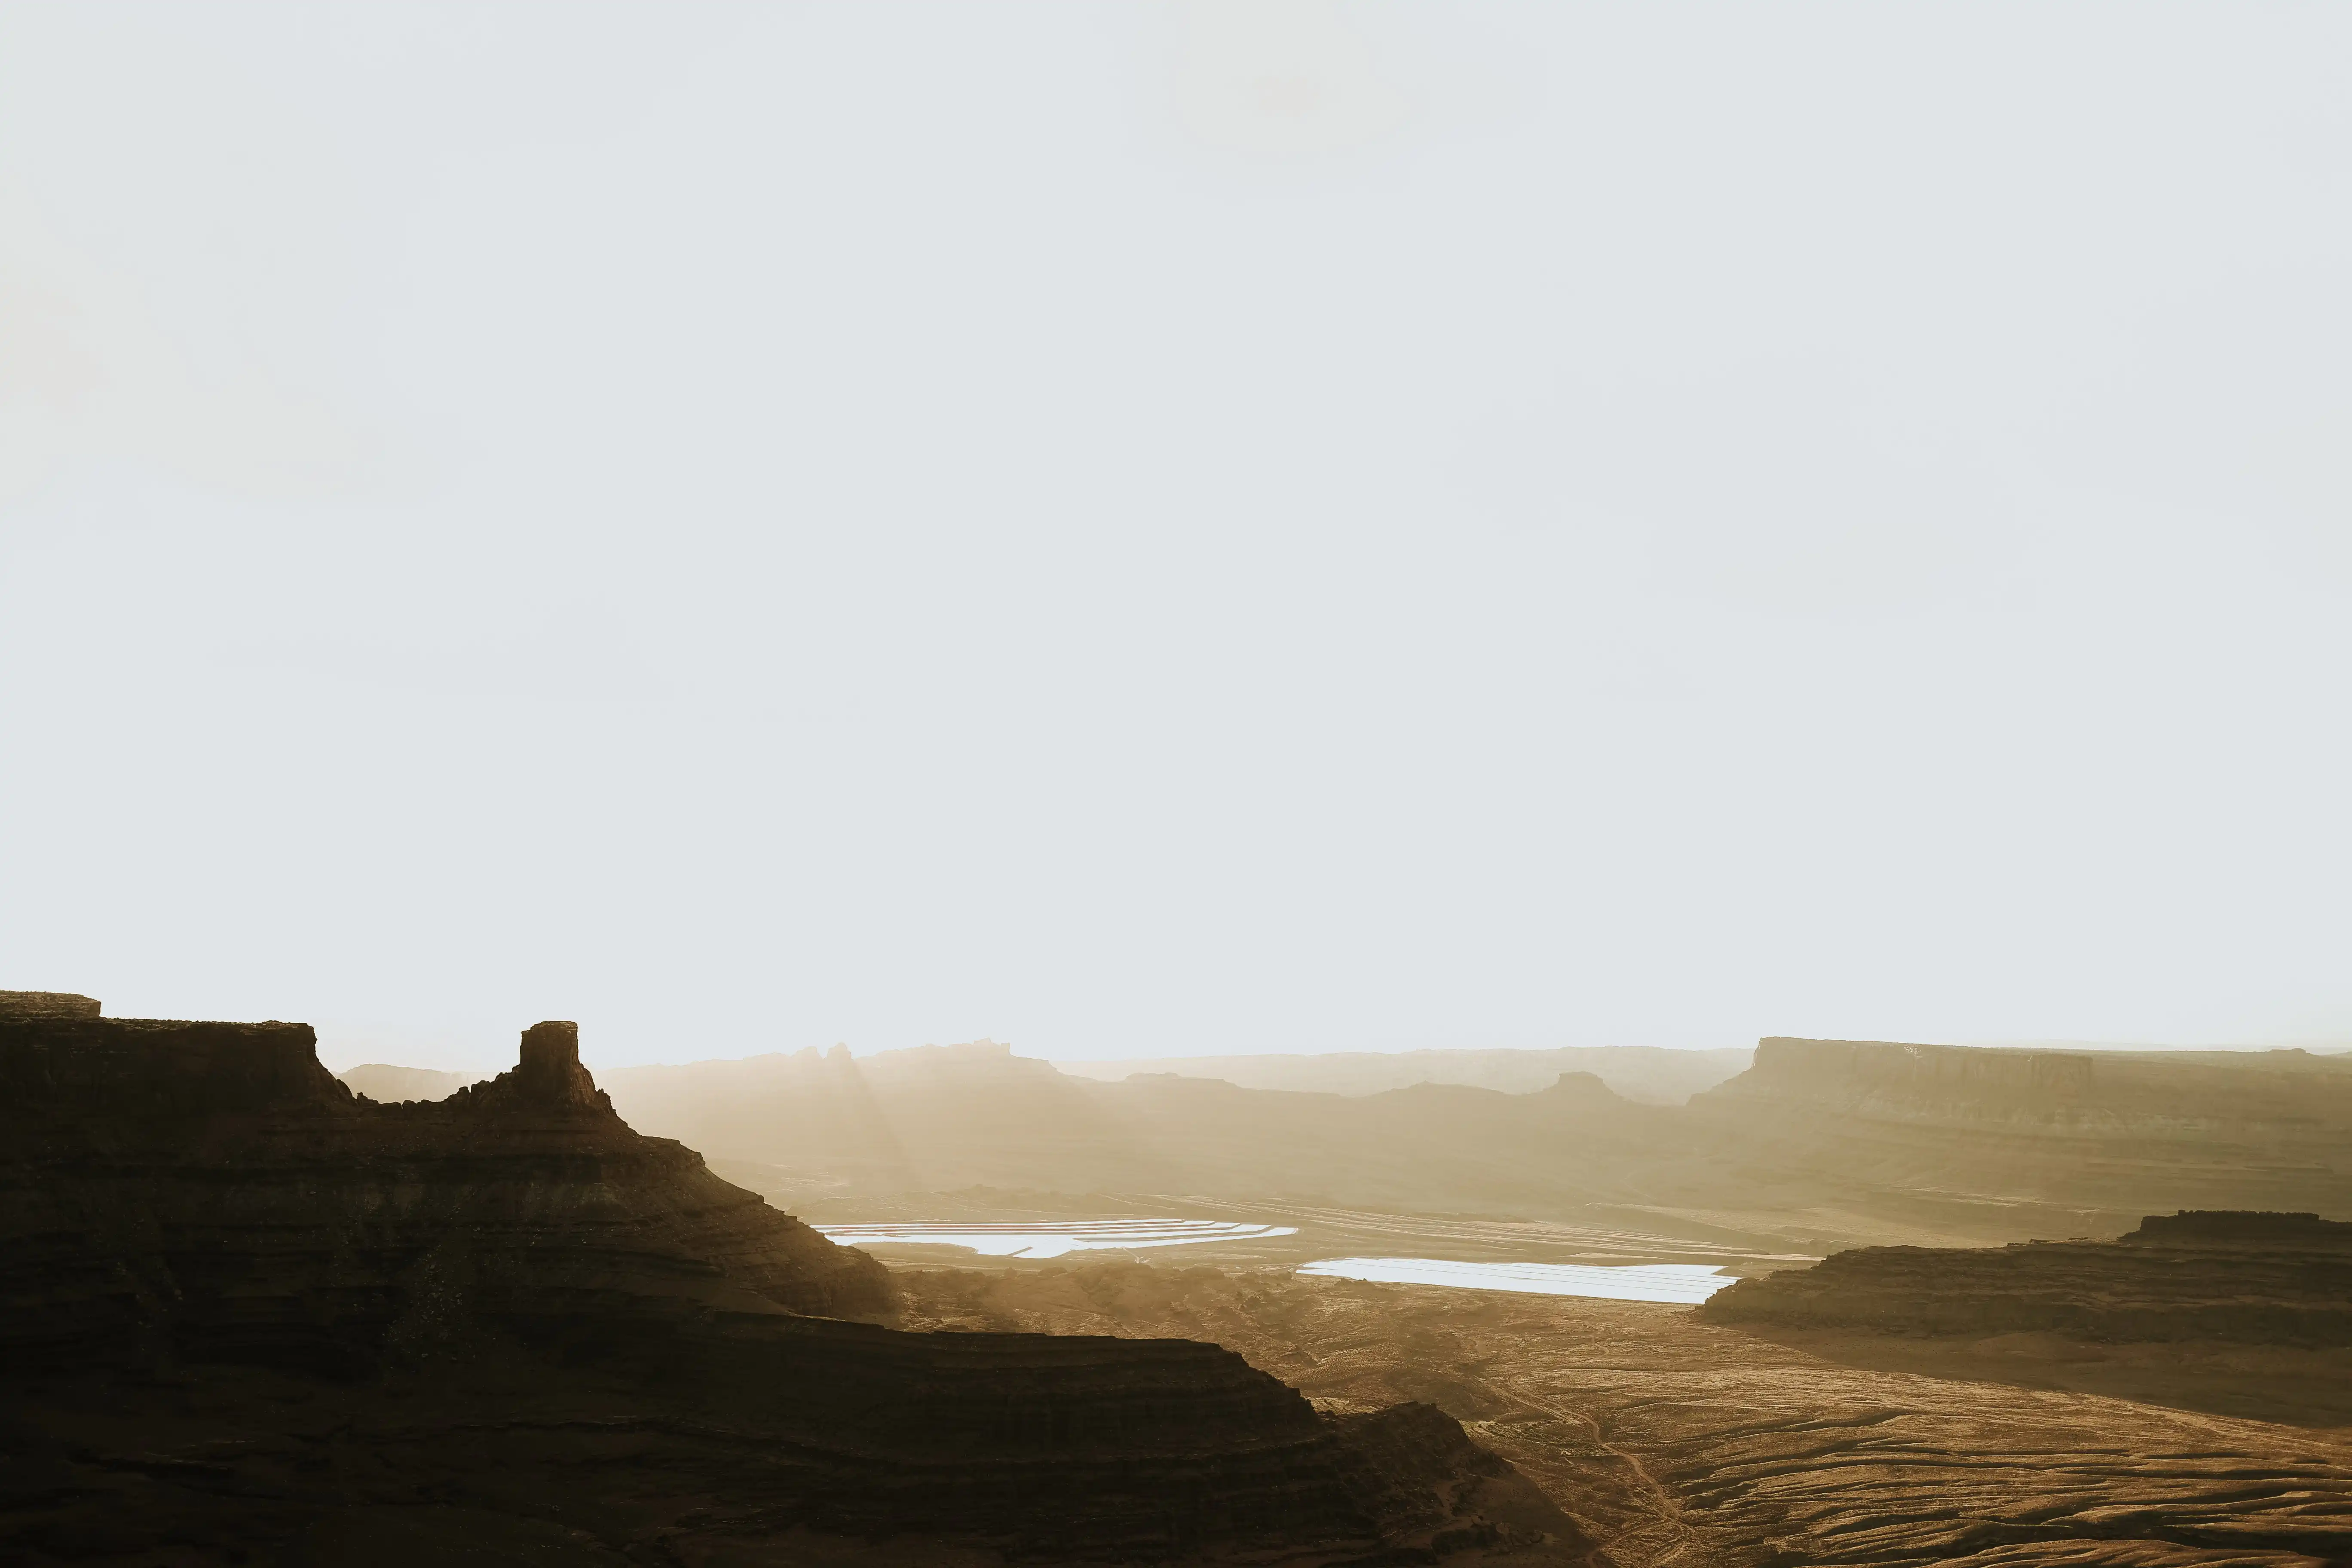 Scenic view of Dead Horse Point